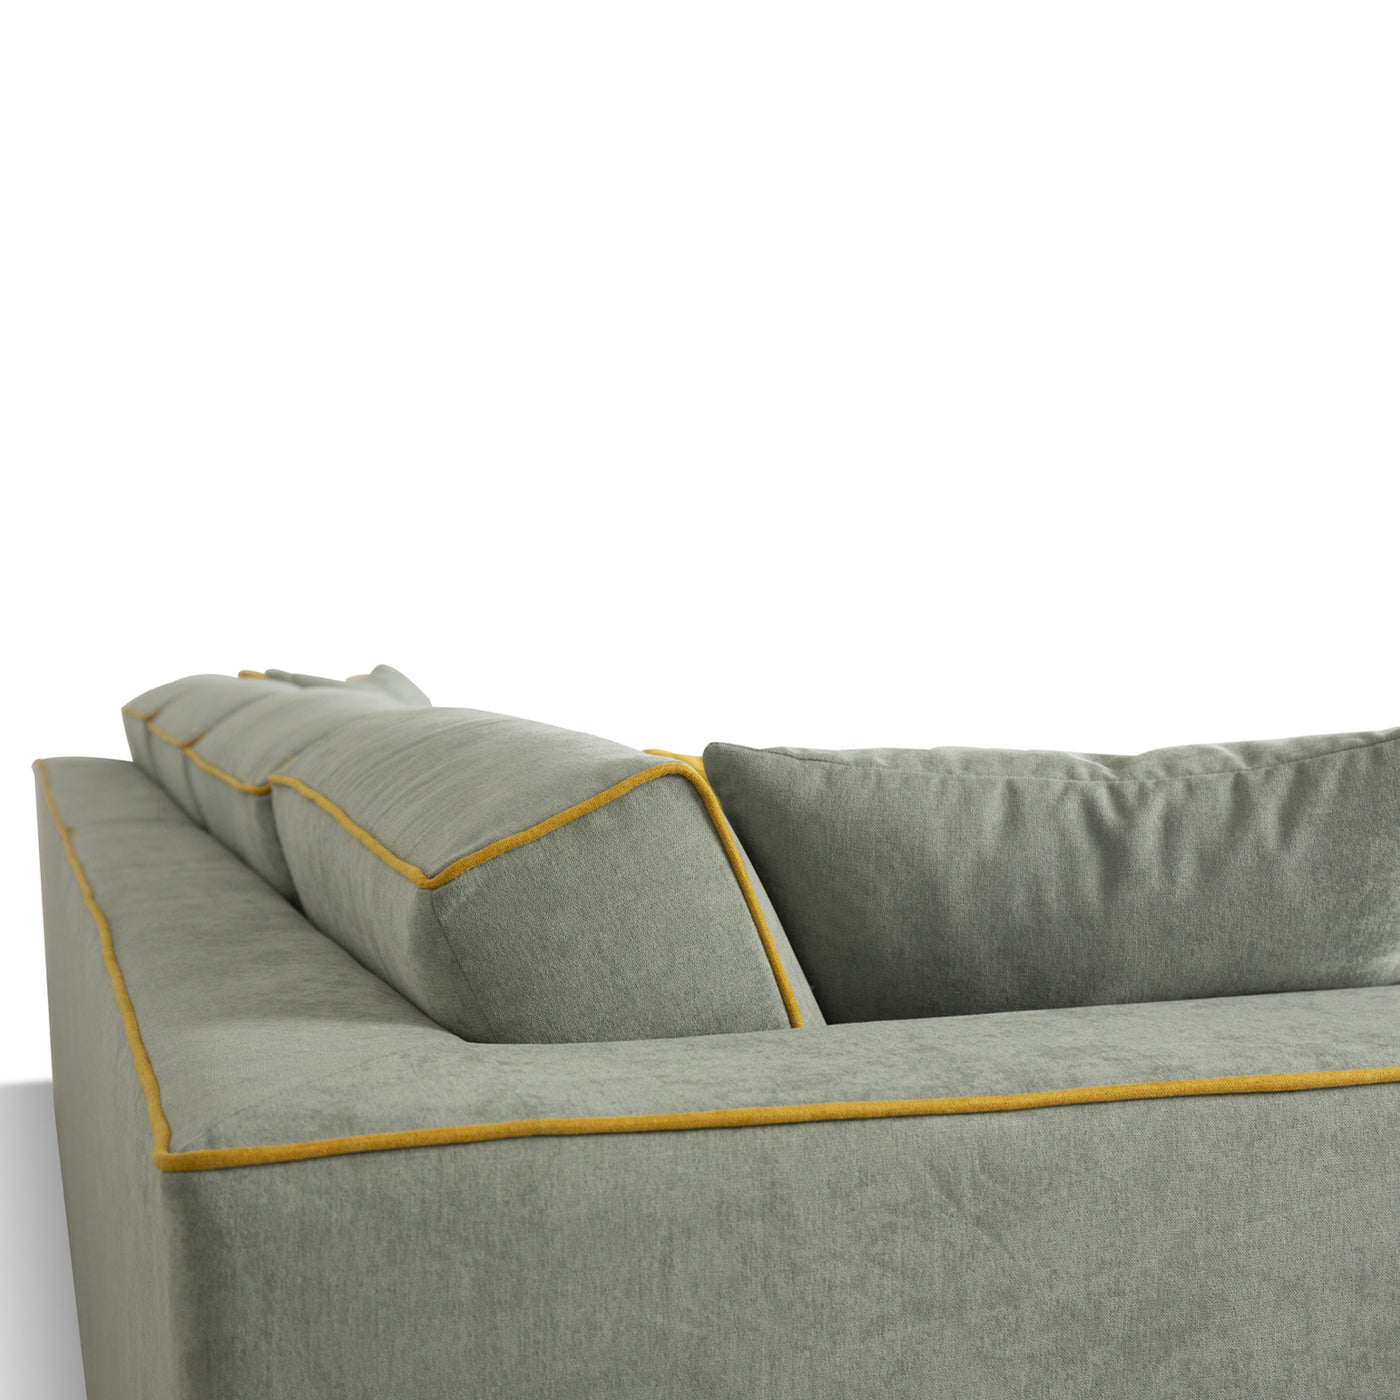 Jackie 6-Seater Gray and Yellow Sofa - Alternative view 3